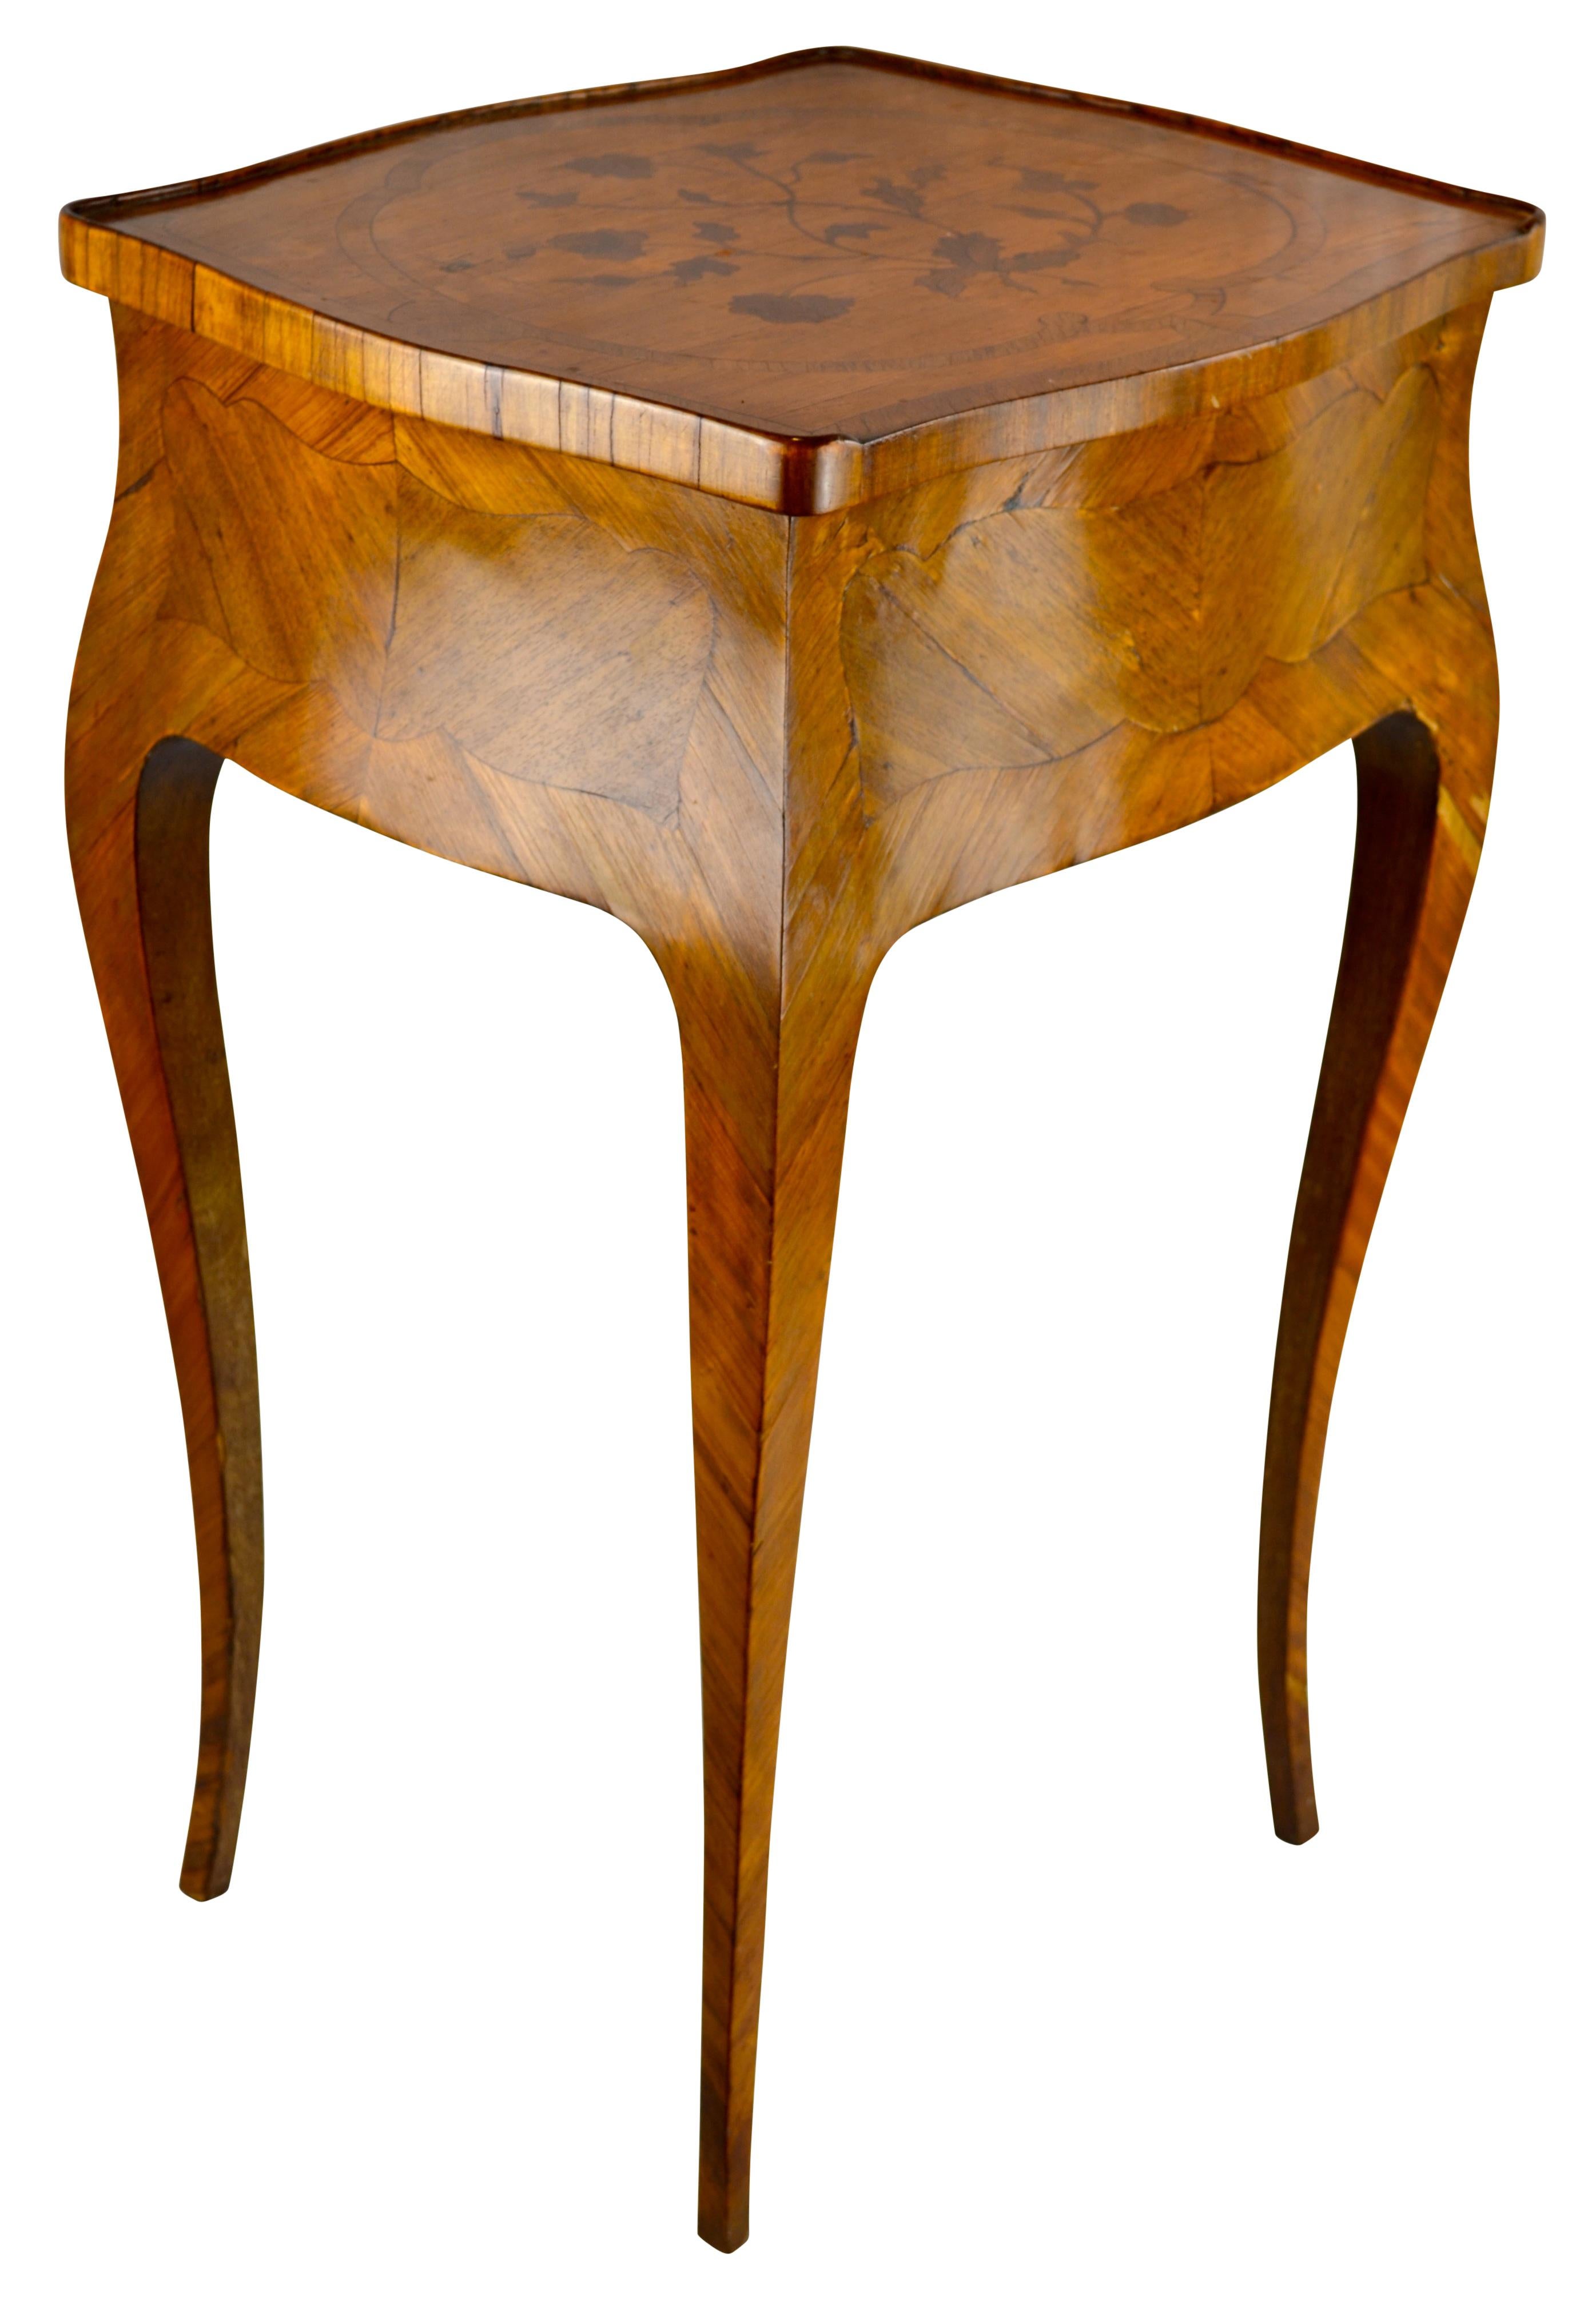 Hand-Crafted French Louis XVI Style Marquetry Table For Sale